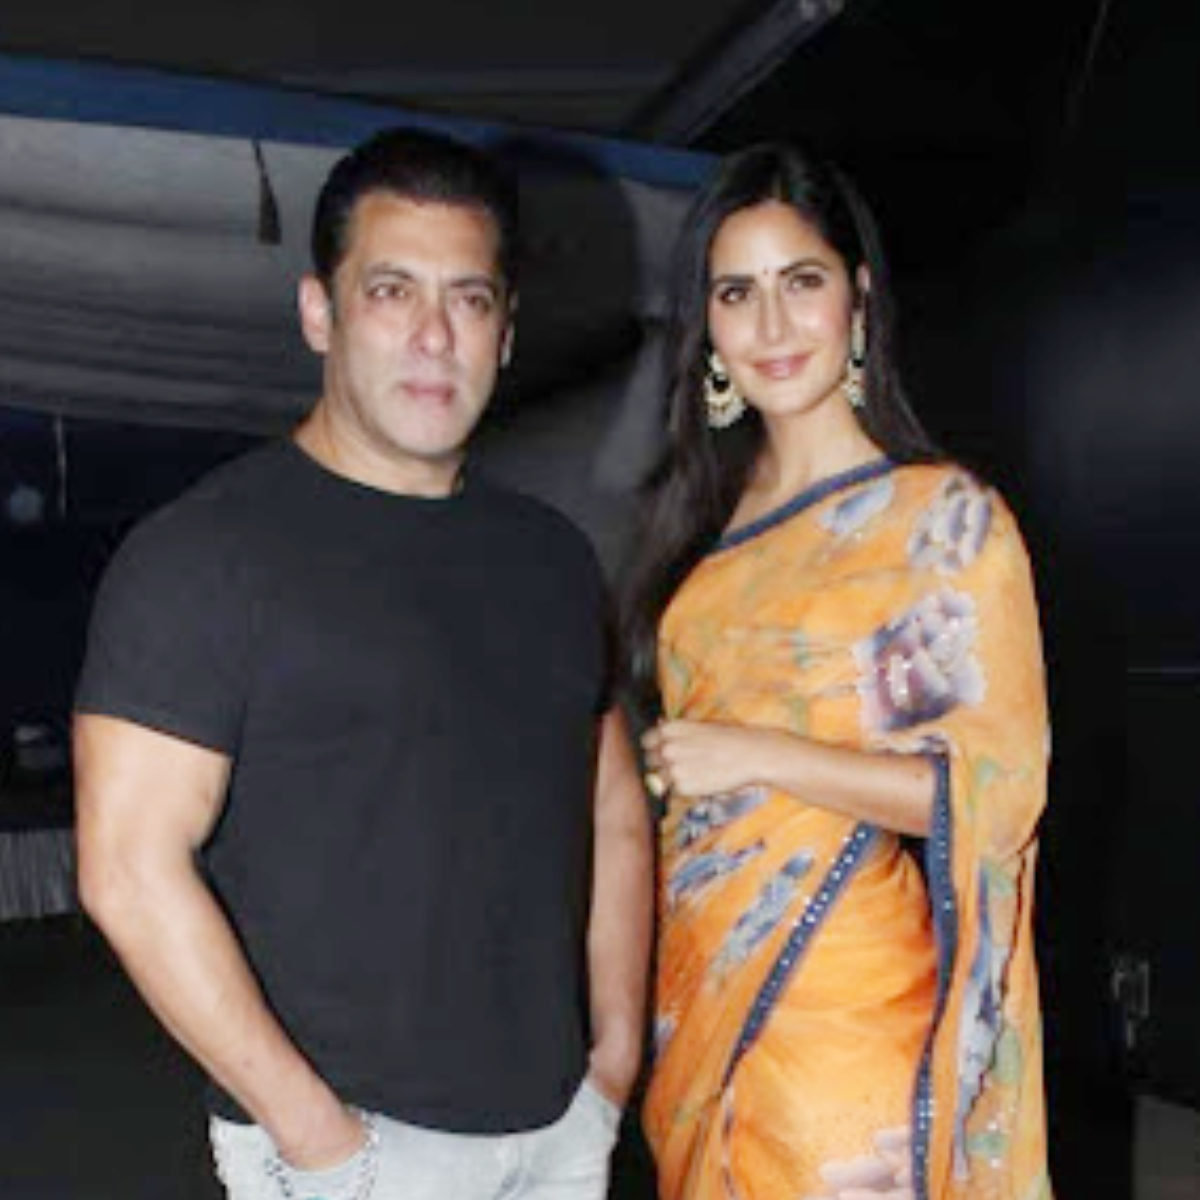 EXCLUSIVE: No truth to 'Roka' with Vicky Kaushal, Katrina Kaif prepped to travel for Tiger 3 with Salman Khan